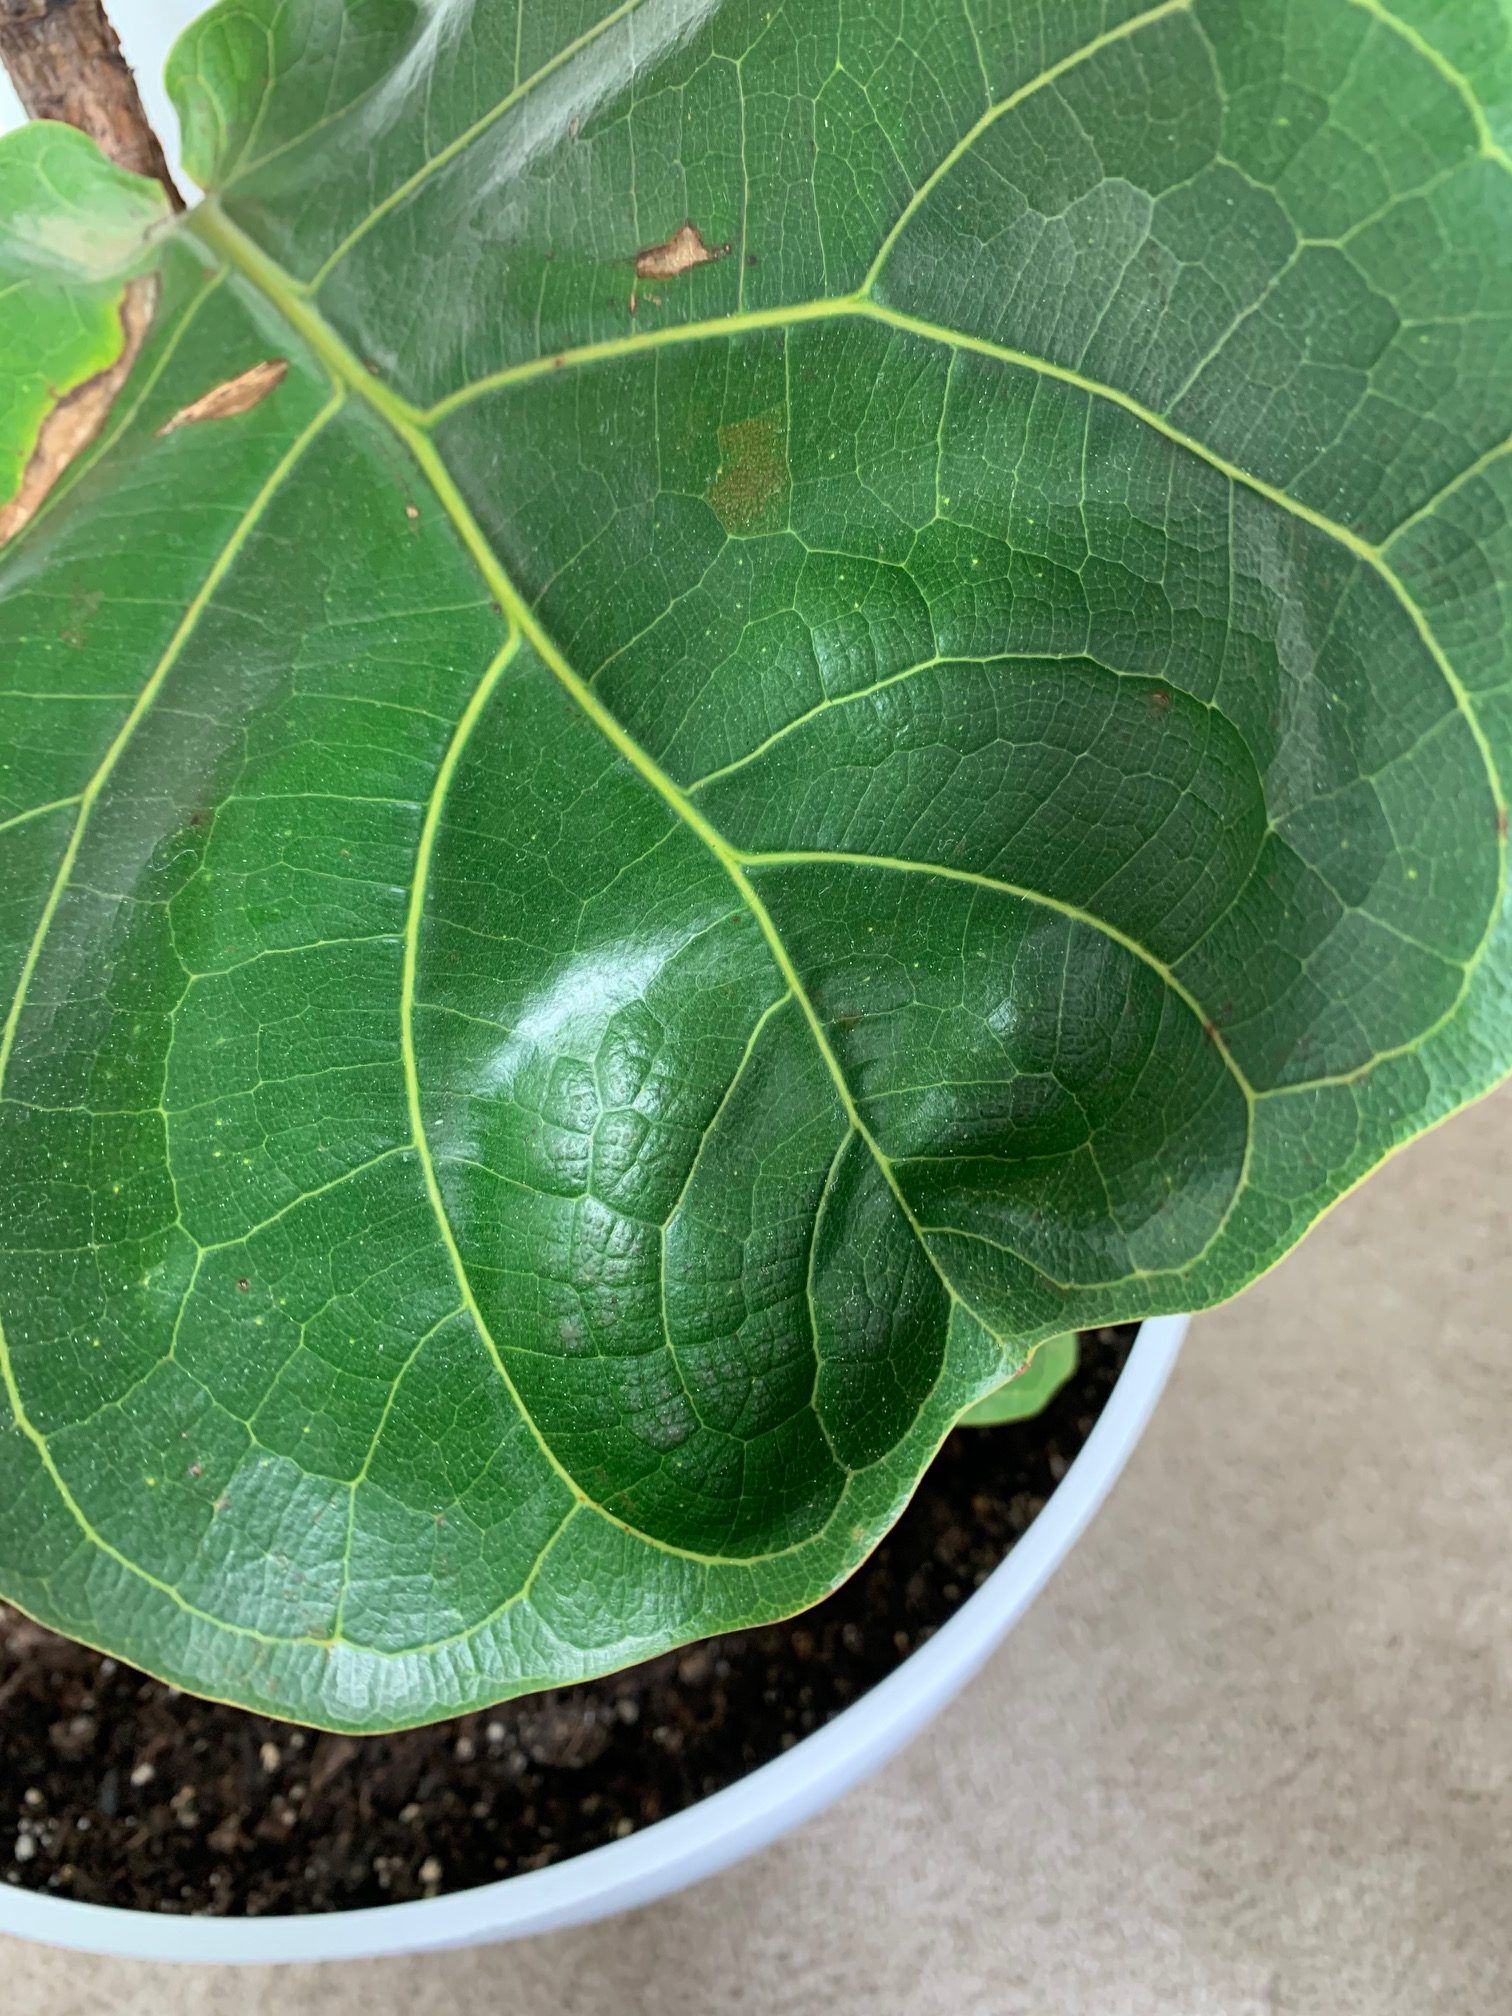 Leaves Cracking/Brown Spots and Curling Leaves | The Fiddle Leaf Fig